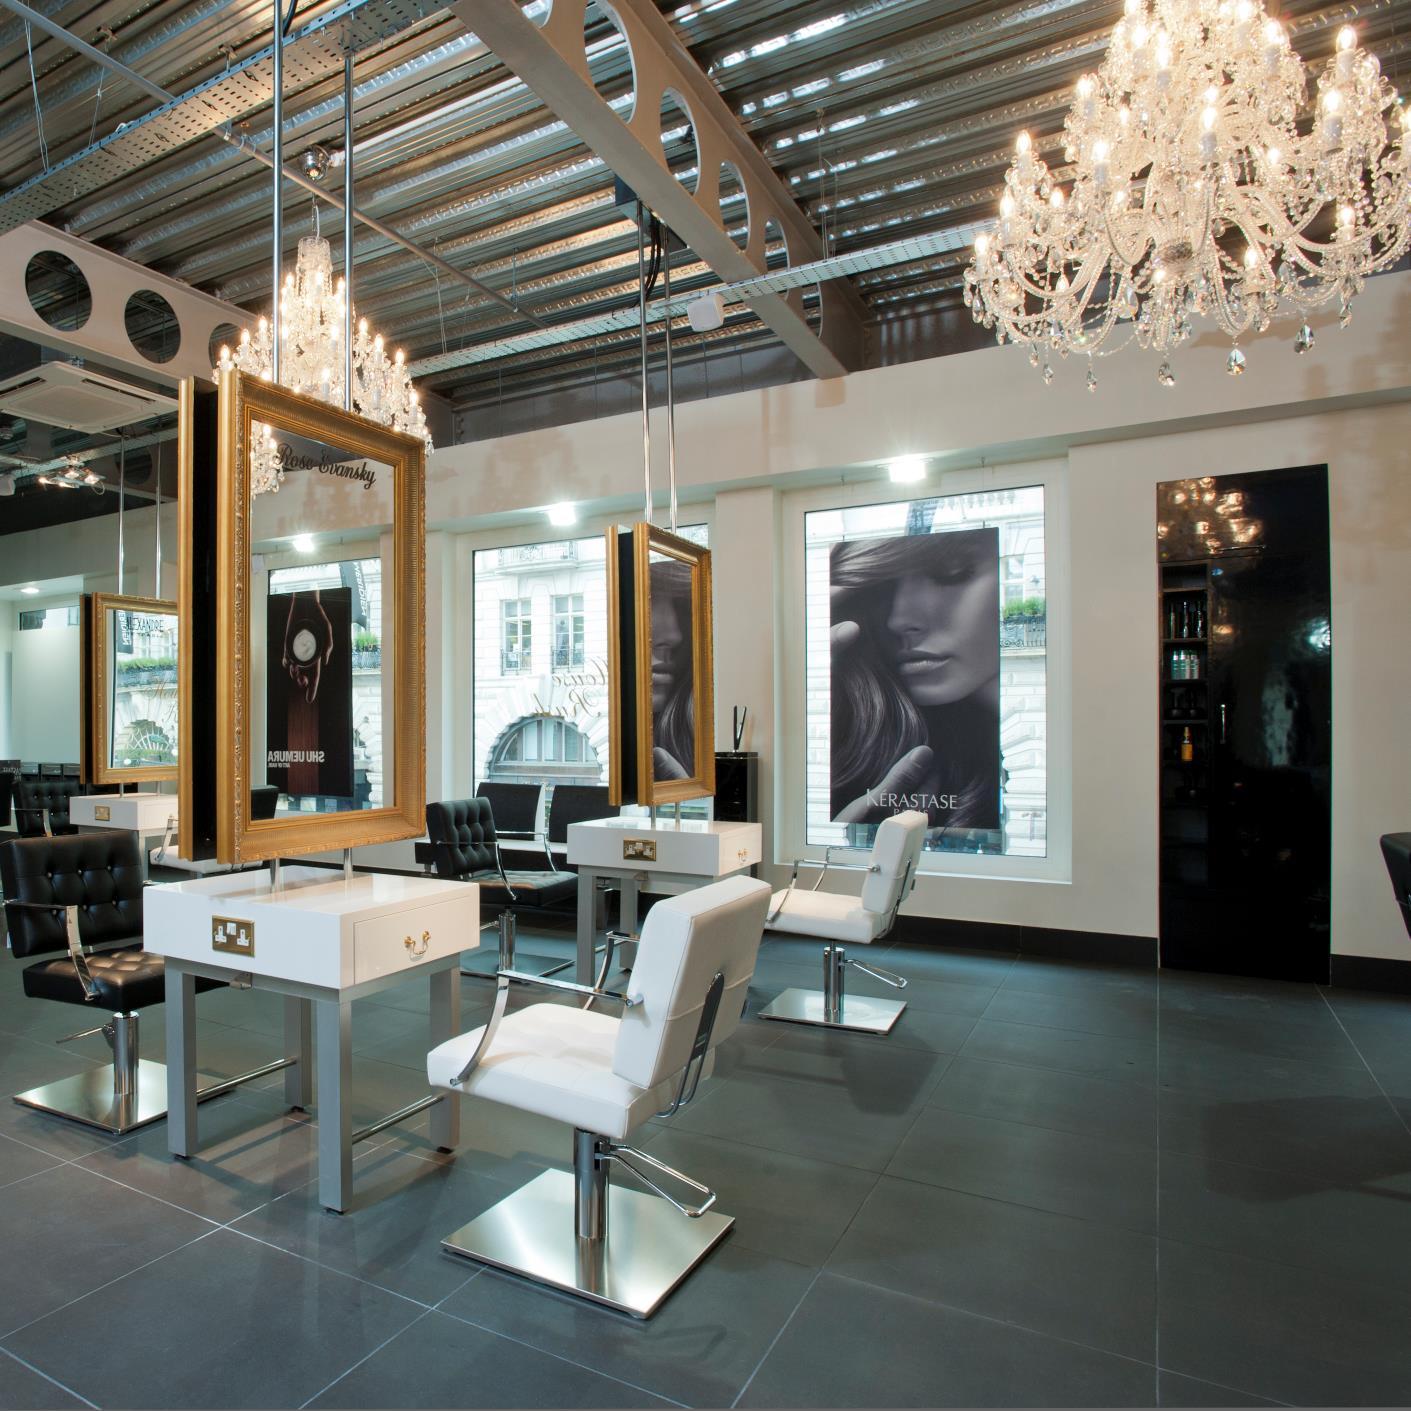 Award winning salon design company.  Specialising in supply of hairdressing & beauty furniture. We create the salon of your dreams.  Finance options  available